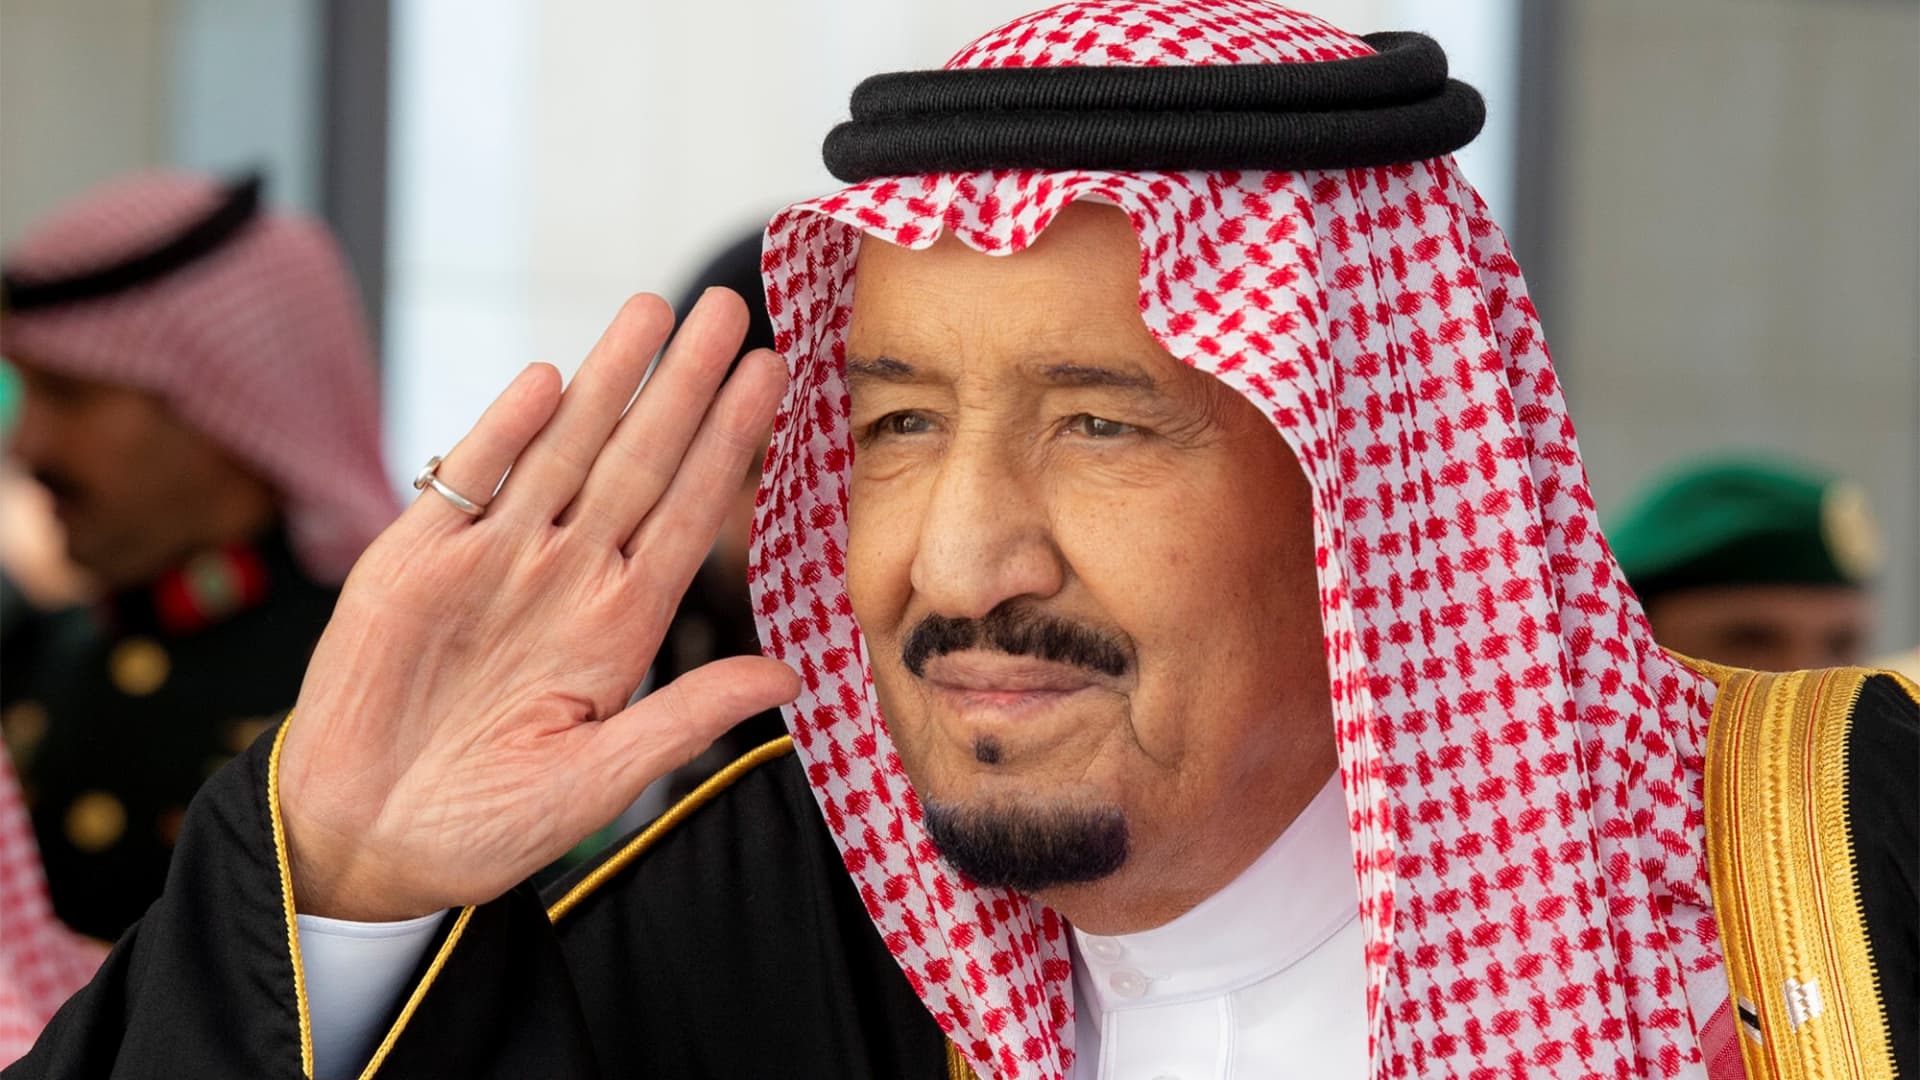 saudi-king-admitted-to-hospital-in-jeddah-for-tests:-saudi-press-agency